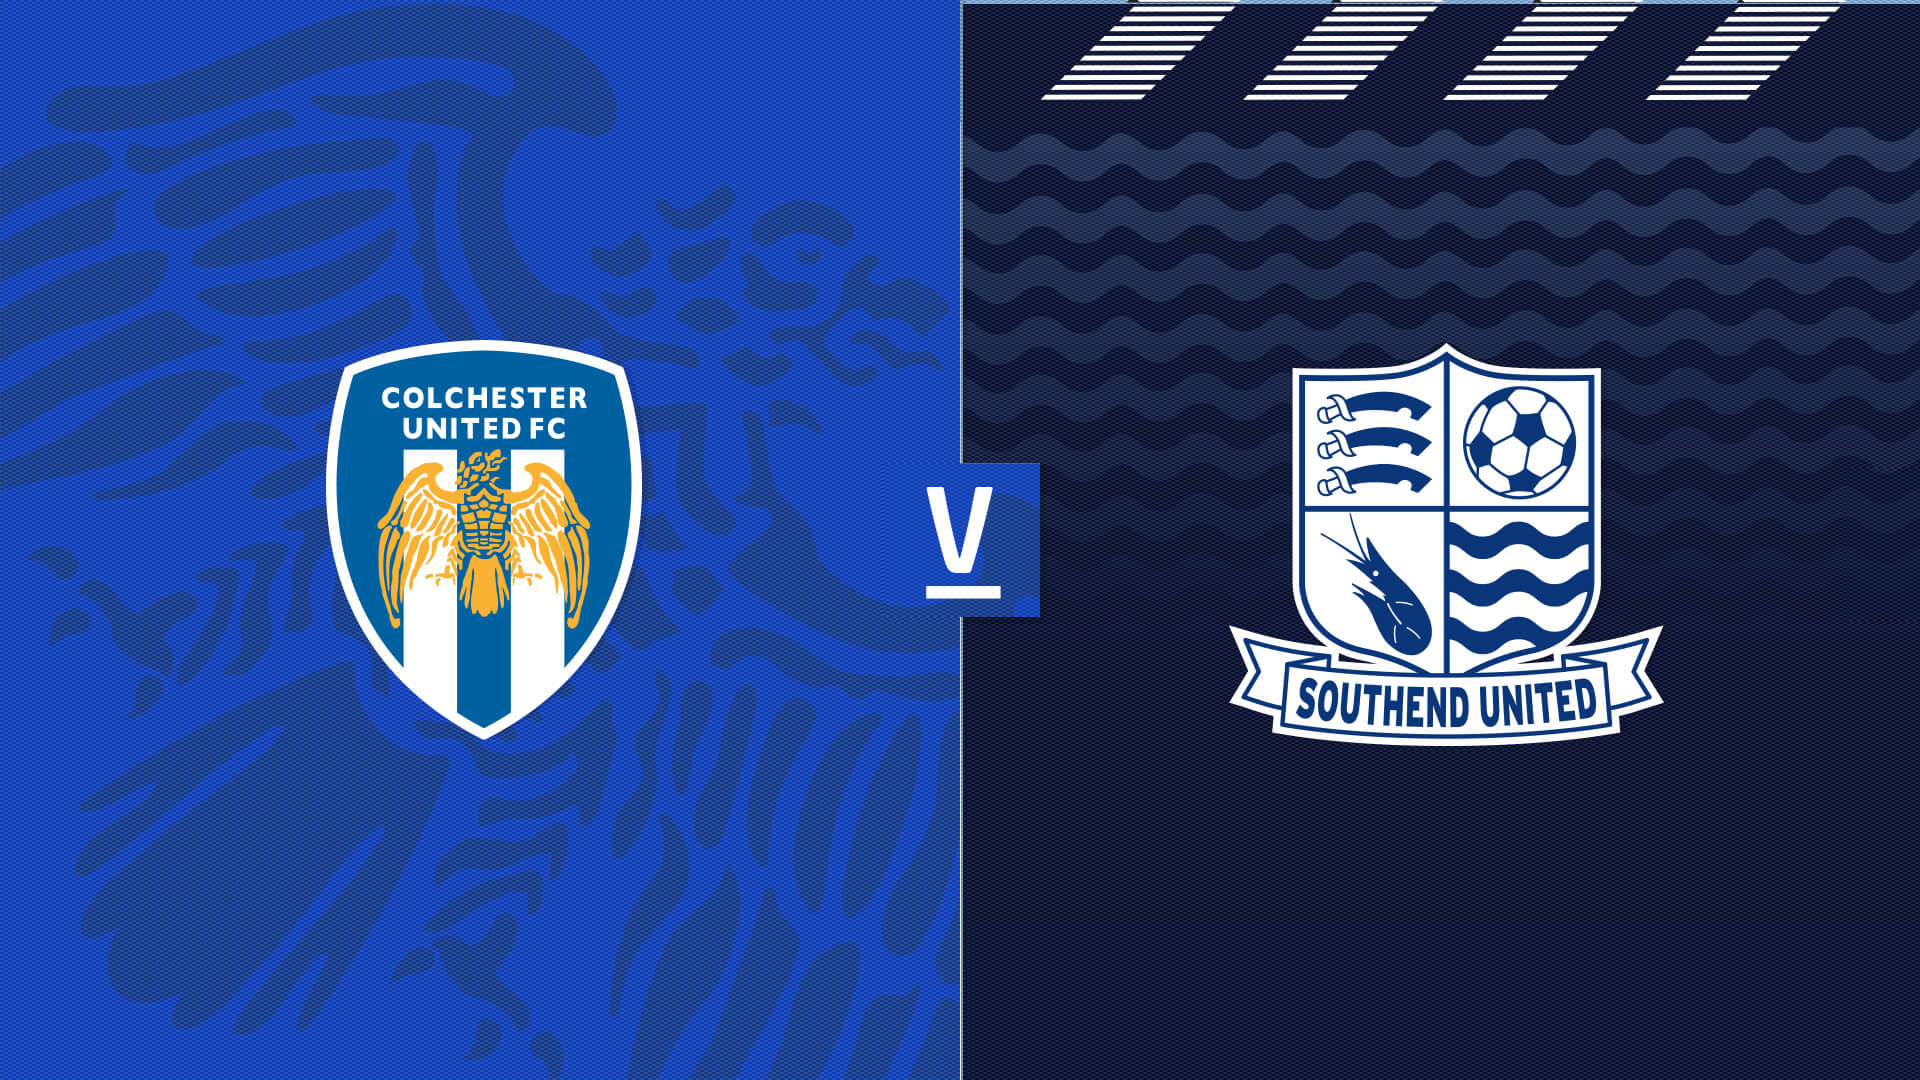 Colchester United F.C. Wallpapers